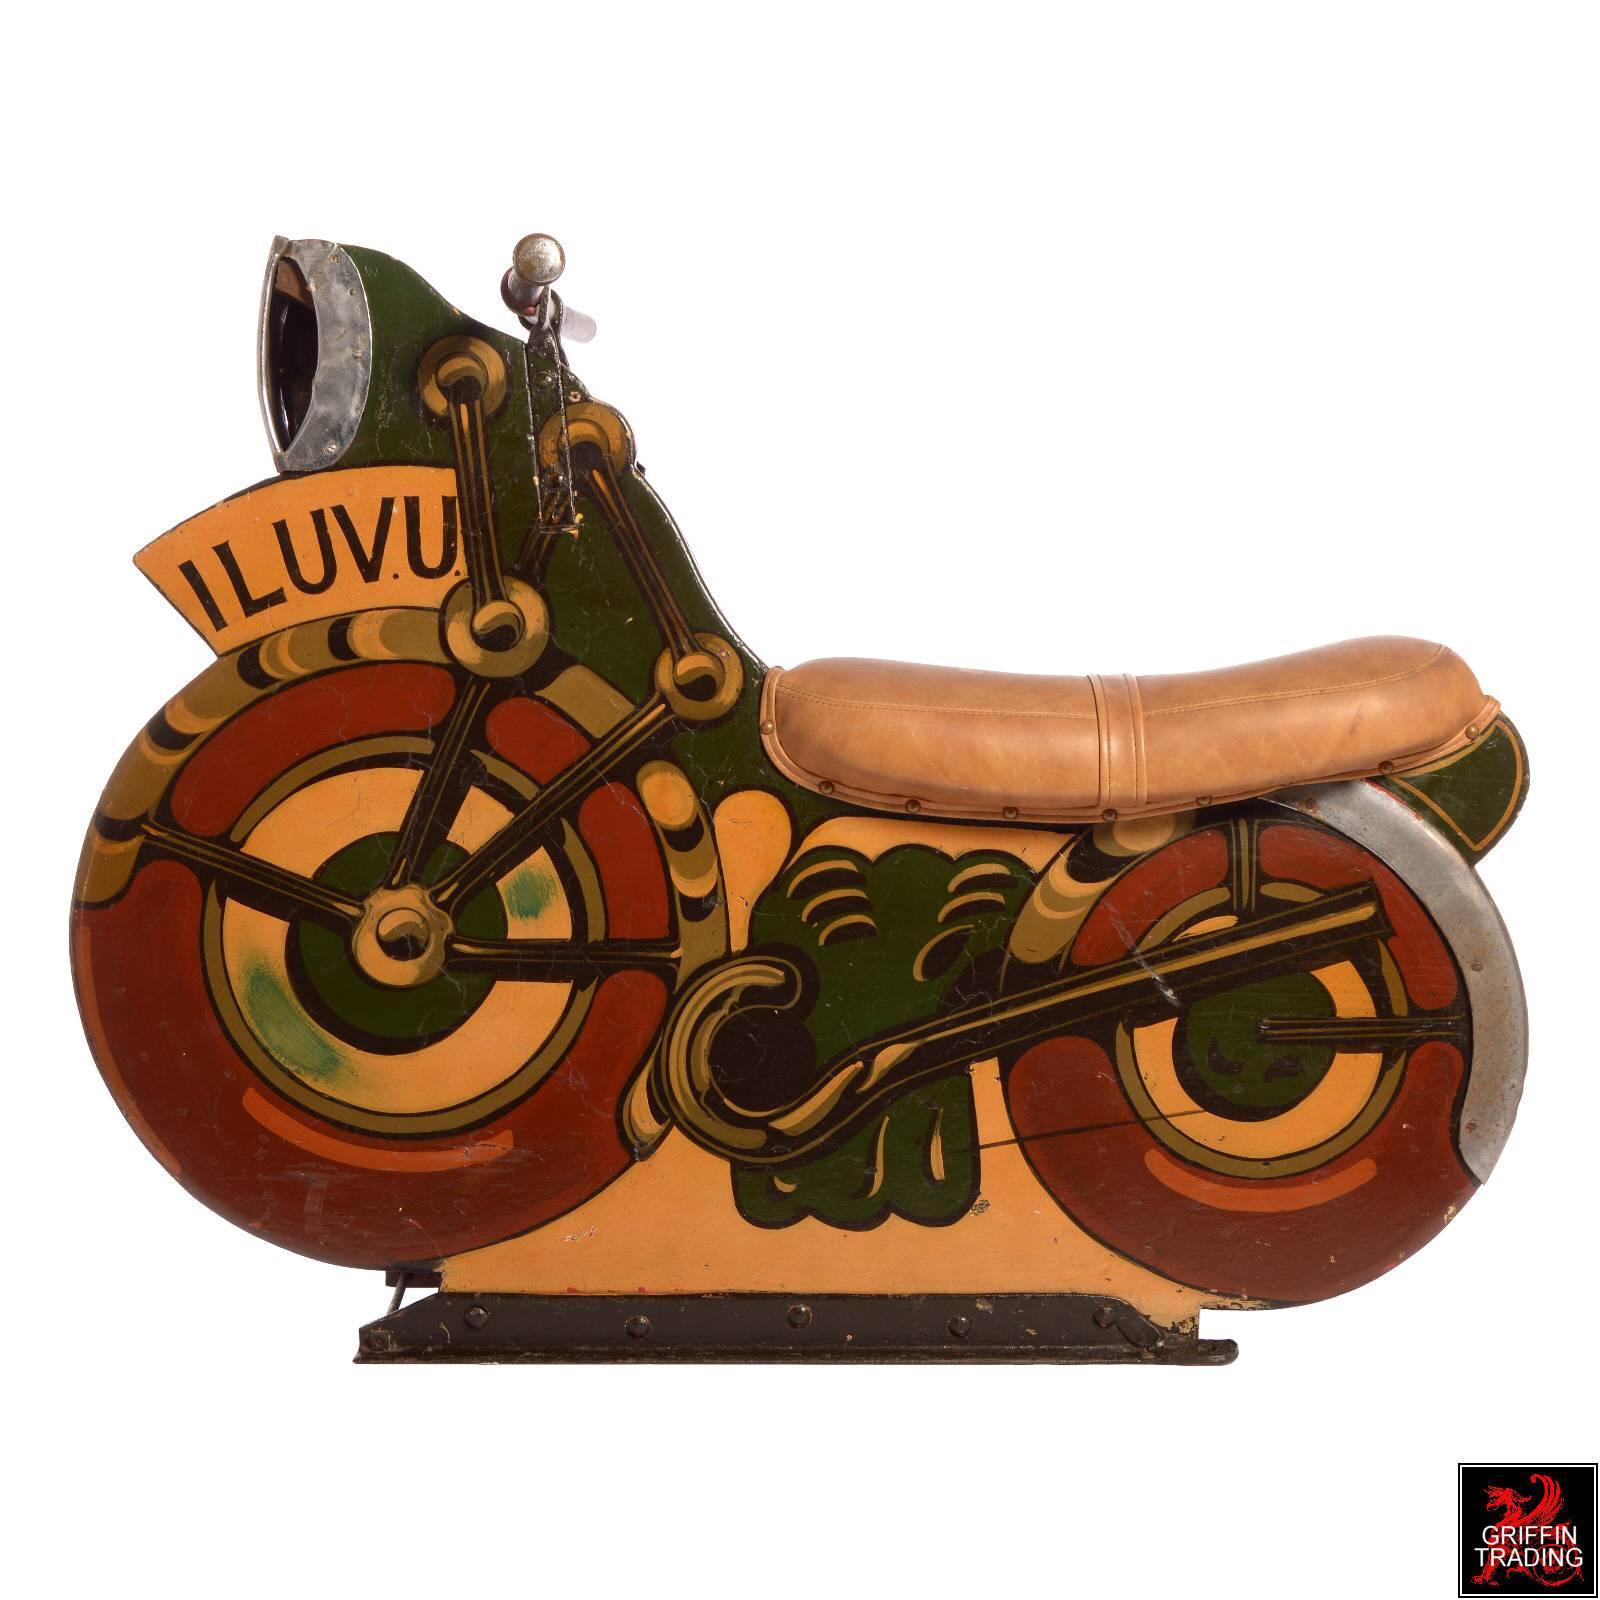 Wow, coolest carousel ride we have ever had. This antique motorcycle is one of the earliest produced for carousels and merry-go-rounds. Love the great style of the motorcycle as well as the painted graphics. What makes this one truly special is that